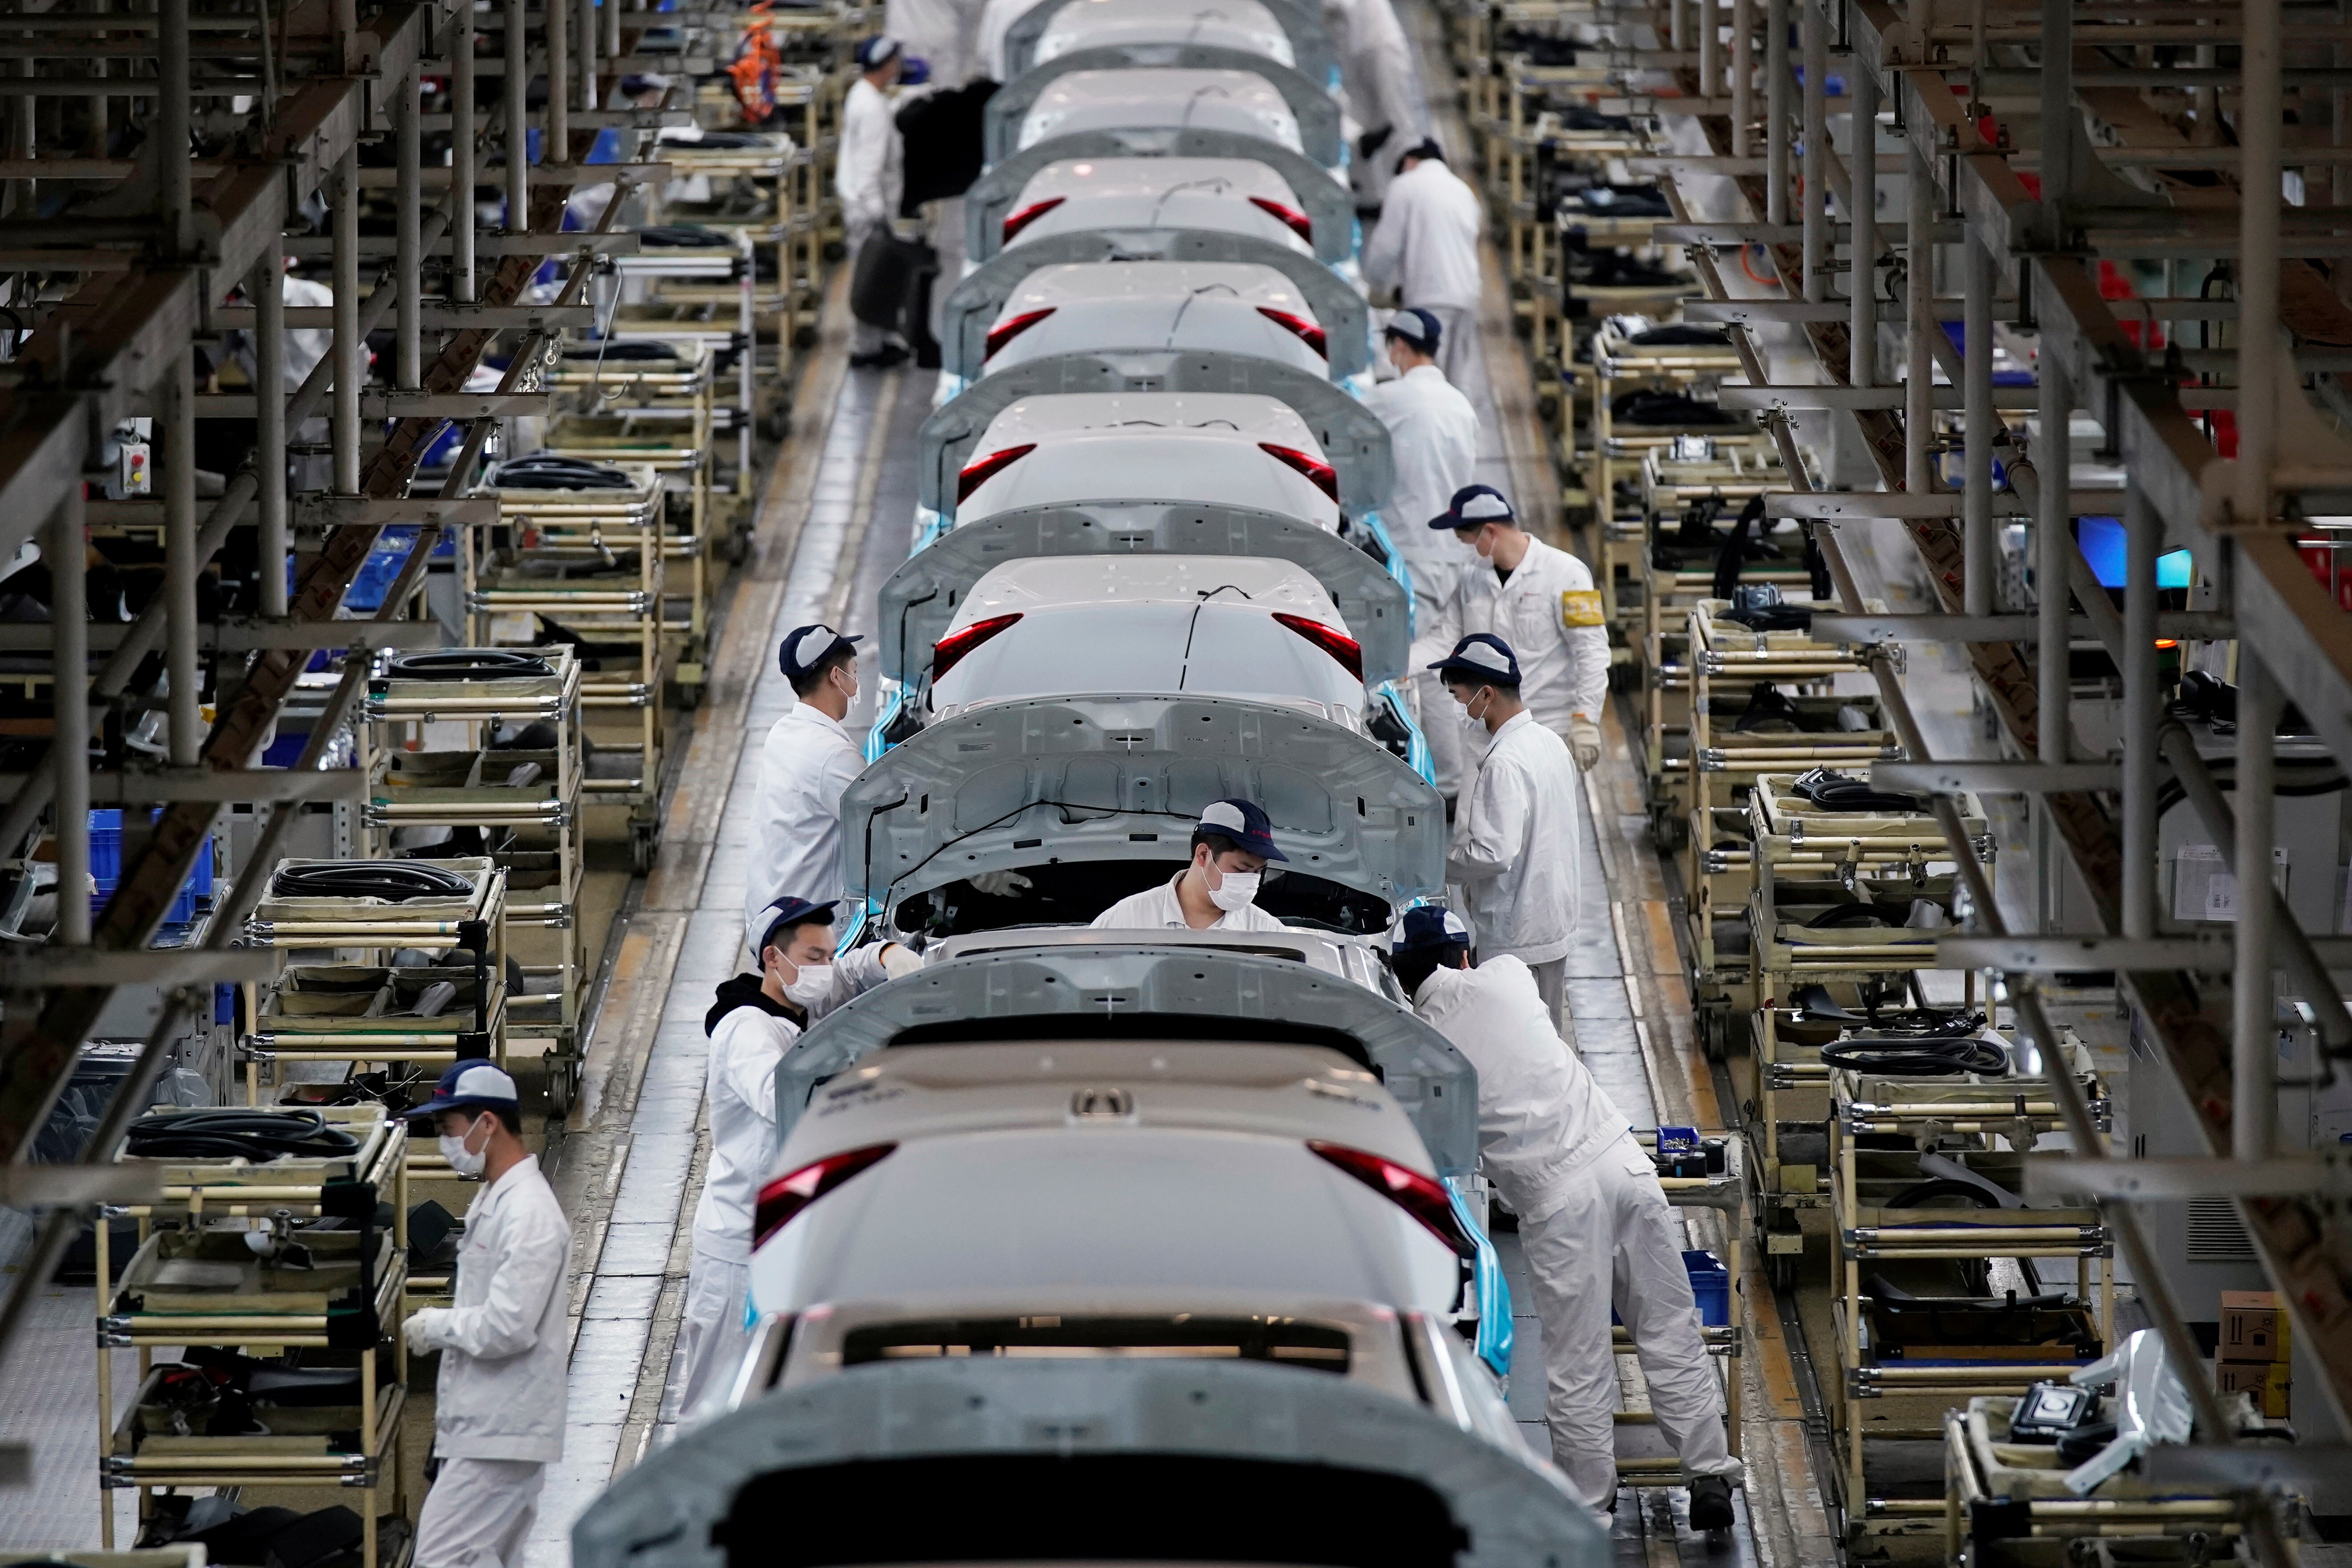 Employees work on a production line at a Dongfeng Honda factory after the lifting of the Wuhan lockdown on April 8. Photo: Reuters